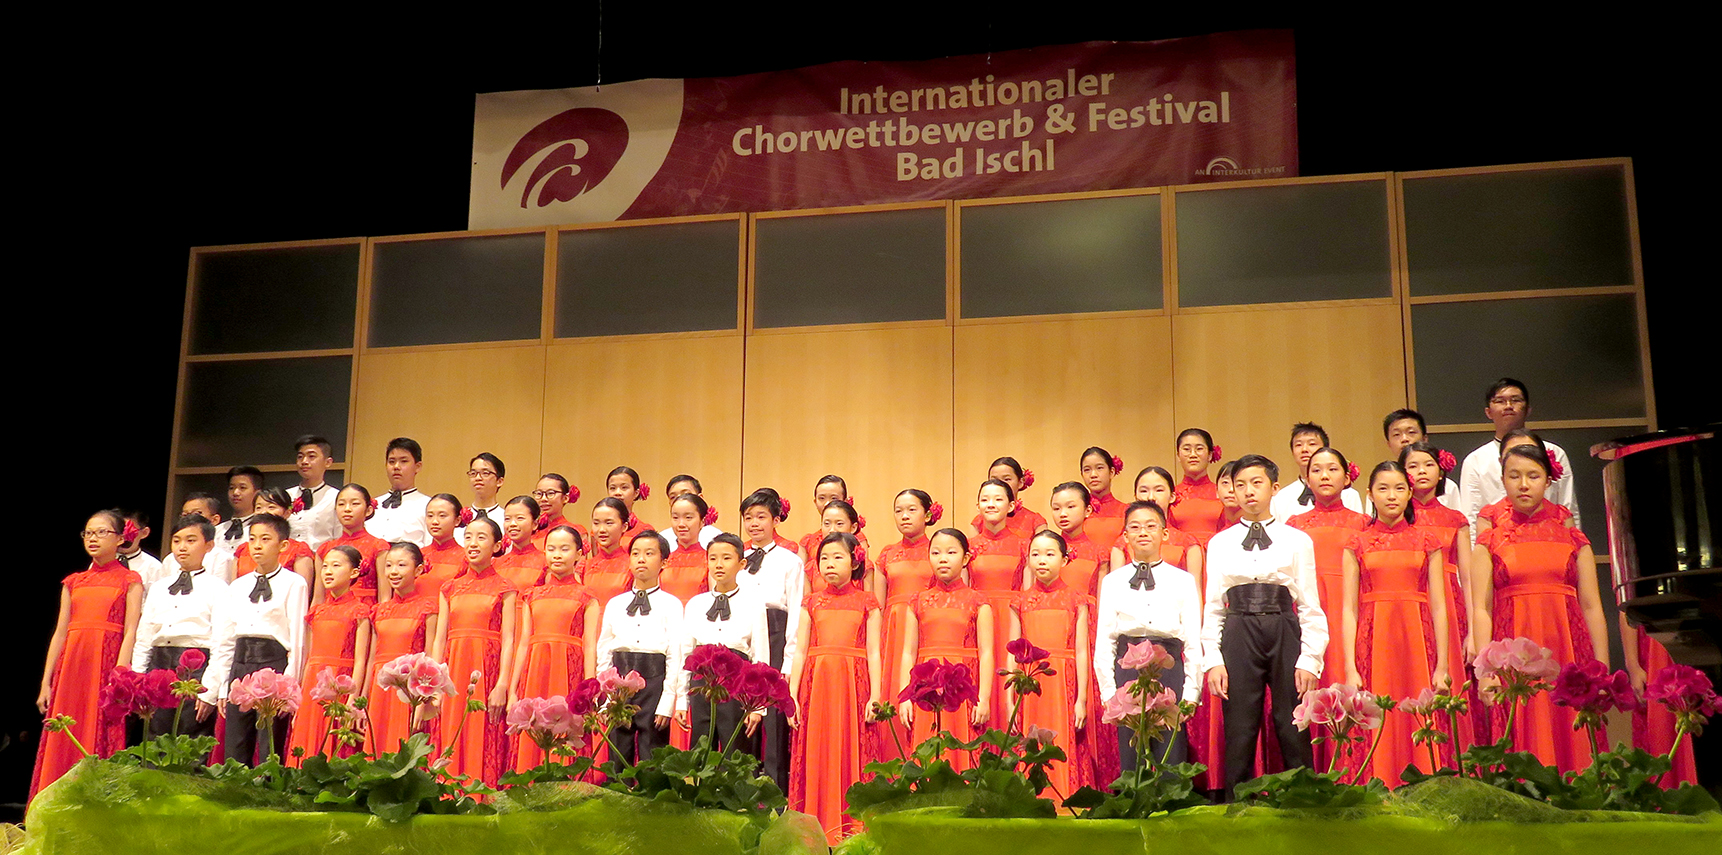 Concert Choir at the 14th International Choir Competition in Austria.<br />
Our choristers enjoyed the stage so much!<br />
